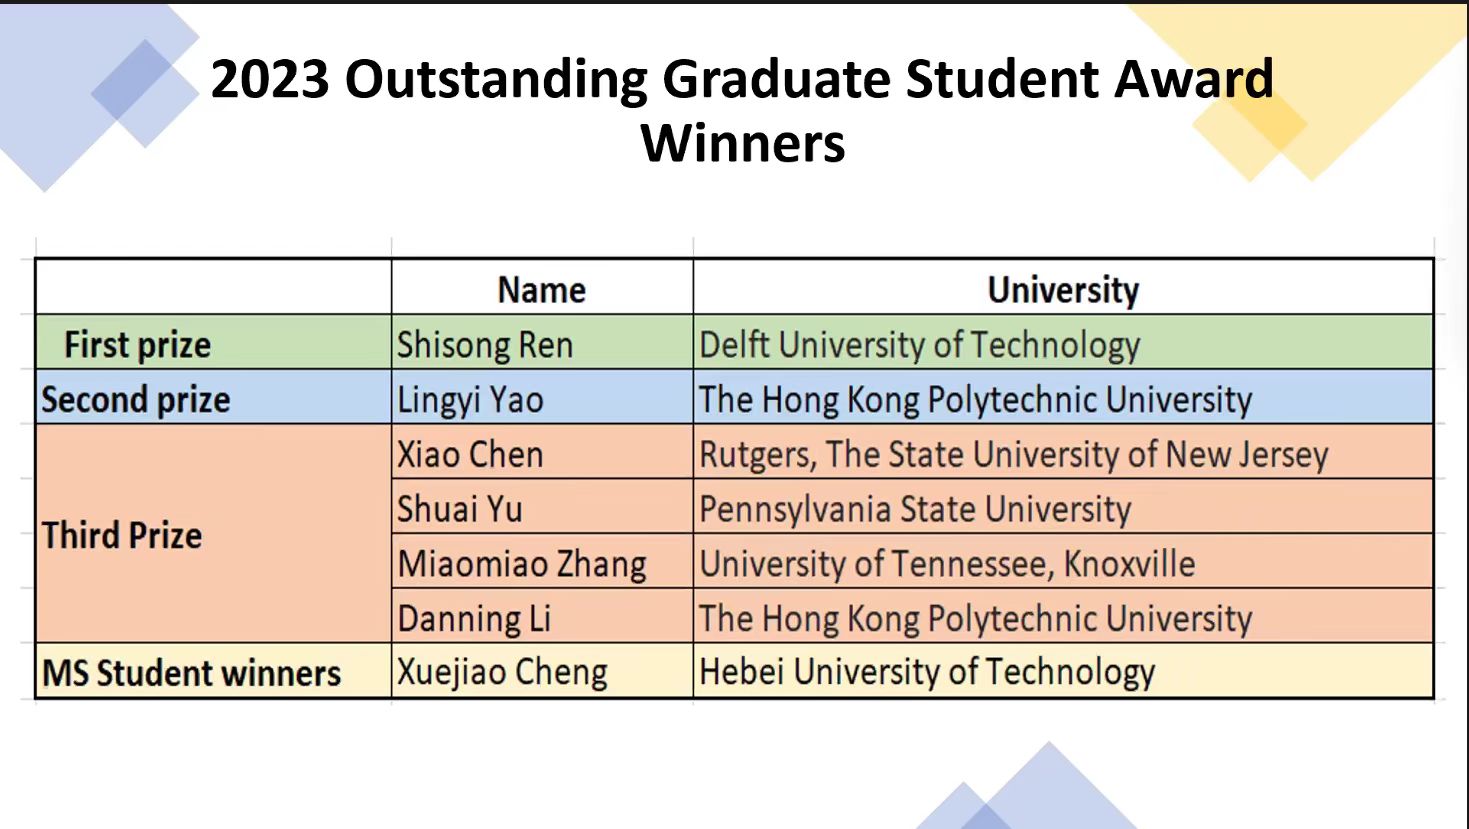 Ms. Linyi Yao and Mr. Danning Li received IACIP outstanding graduate student awards